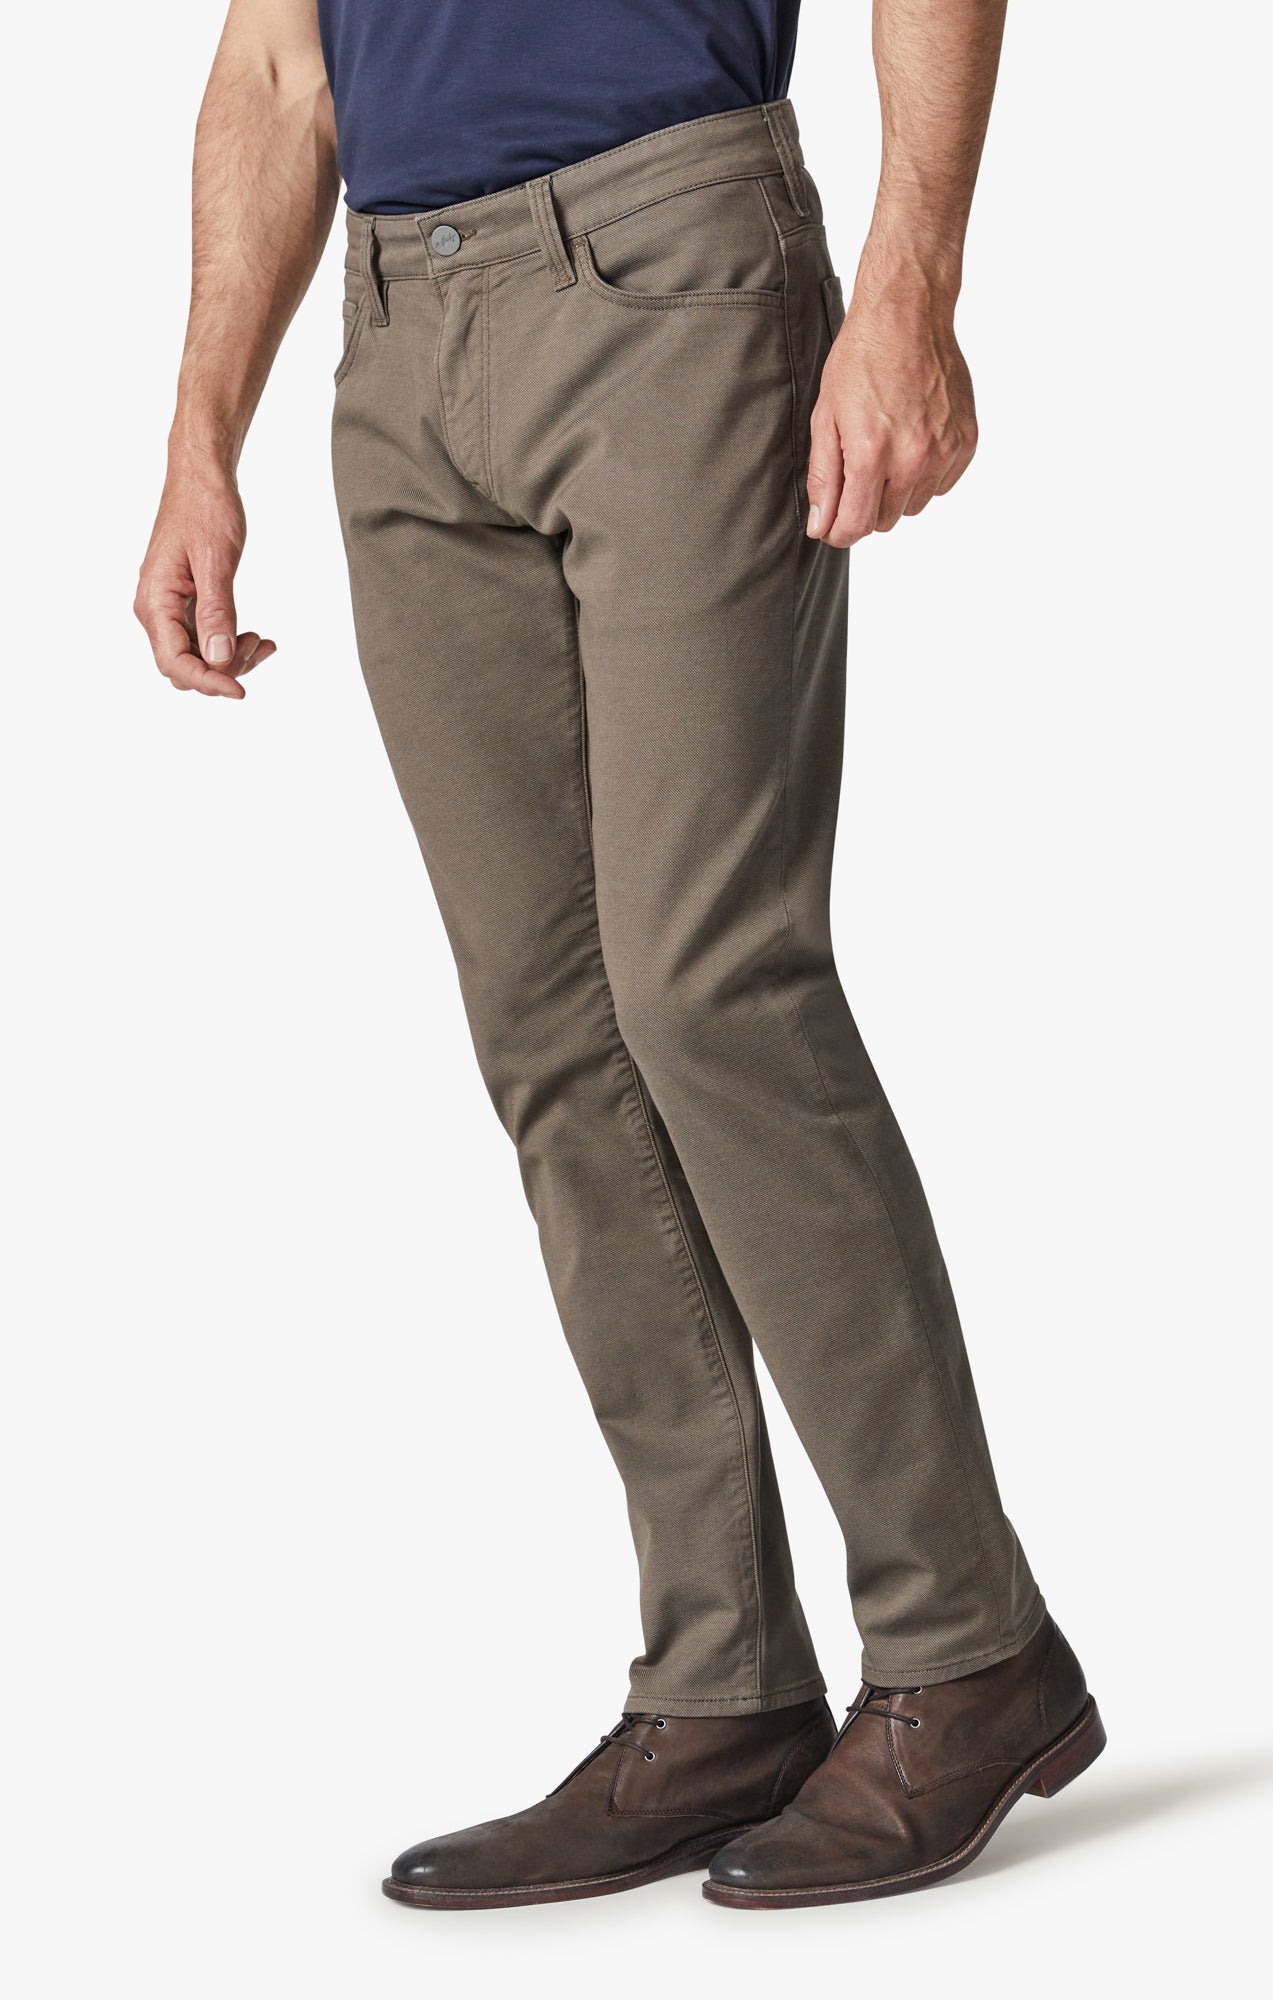 Courage Straight Leg Pants in Canteen Coolmax Image 3